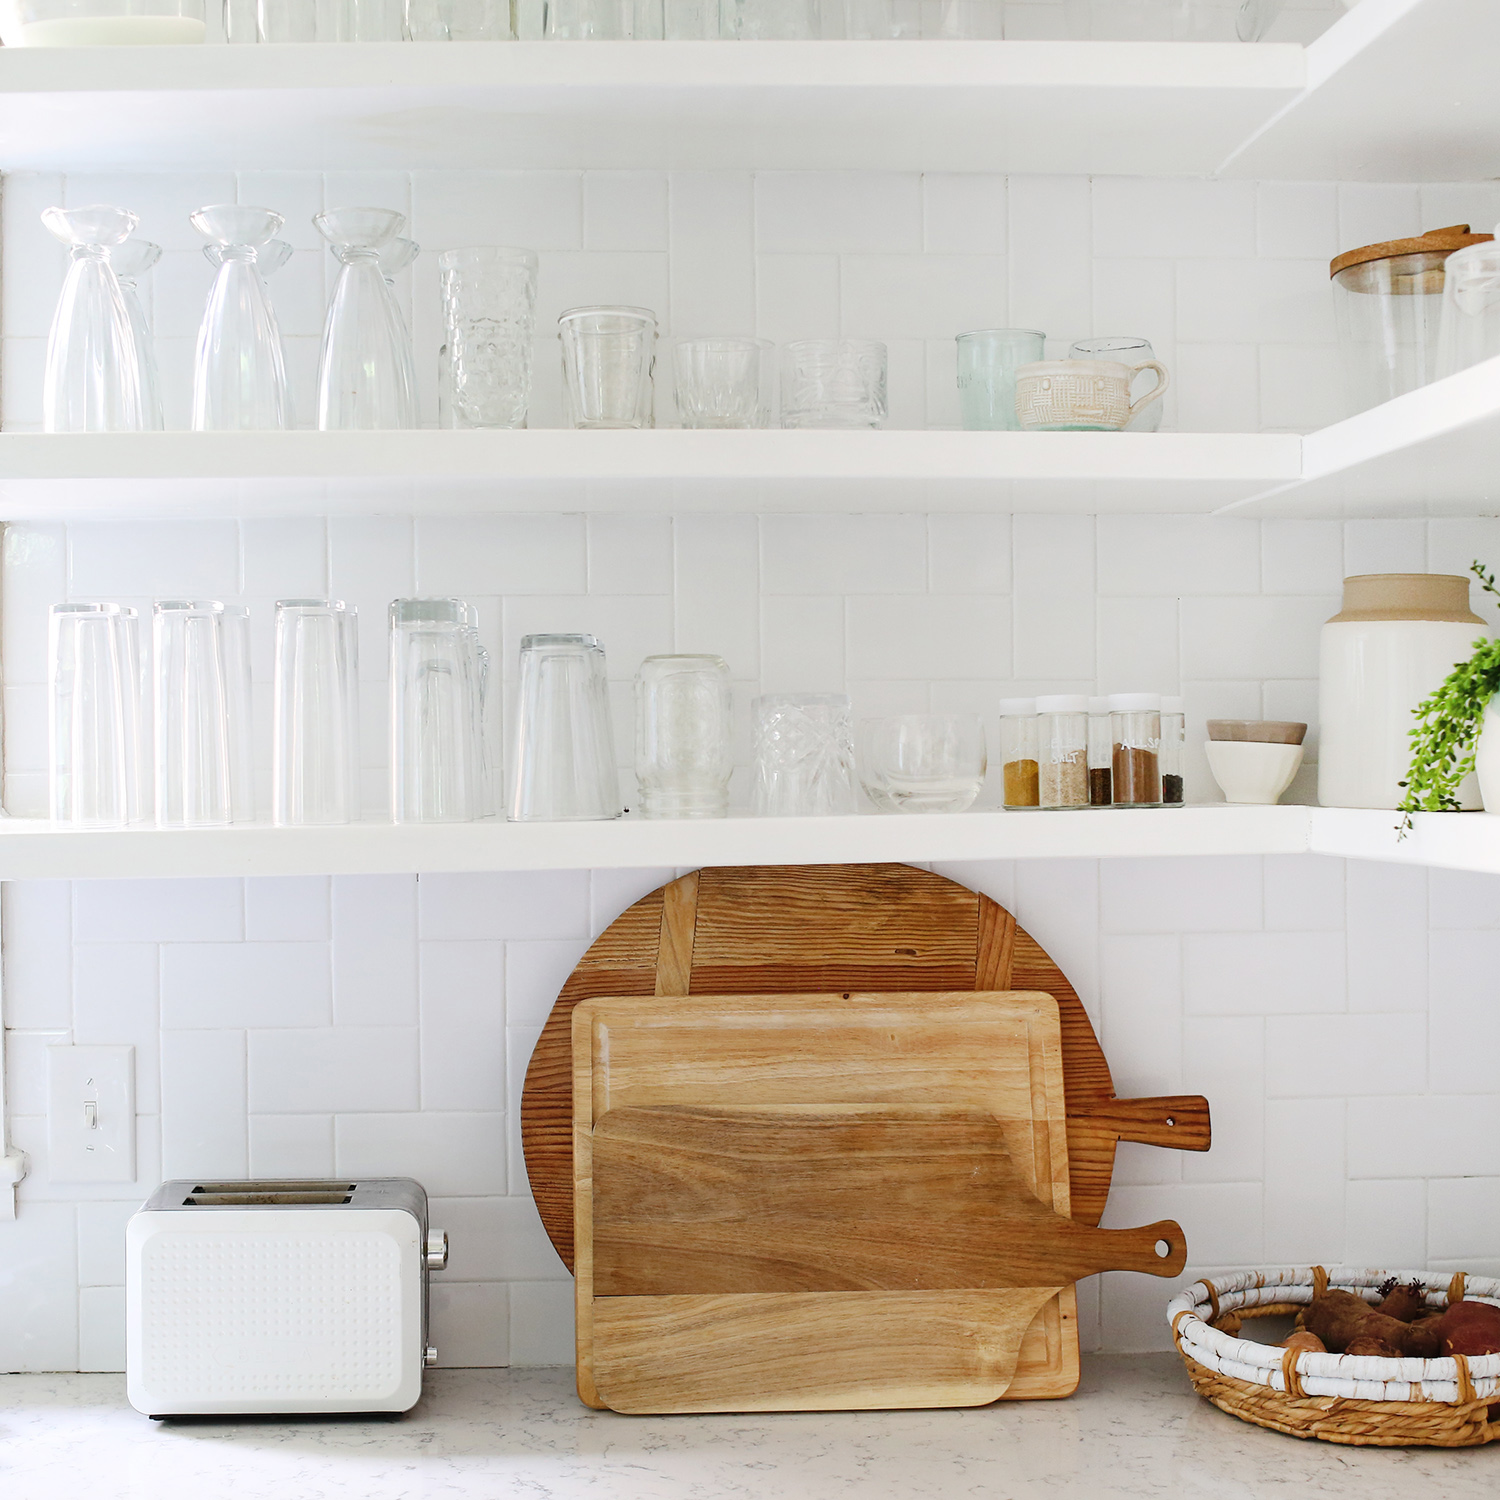 white shelves with clear glasses on it and a toaster and wooden cutting boards on countertop